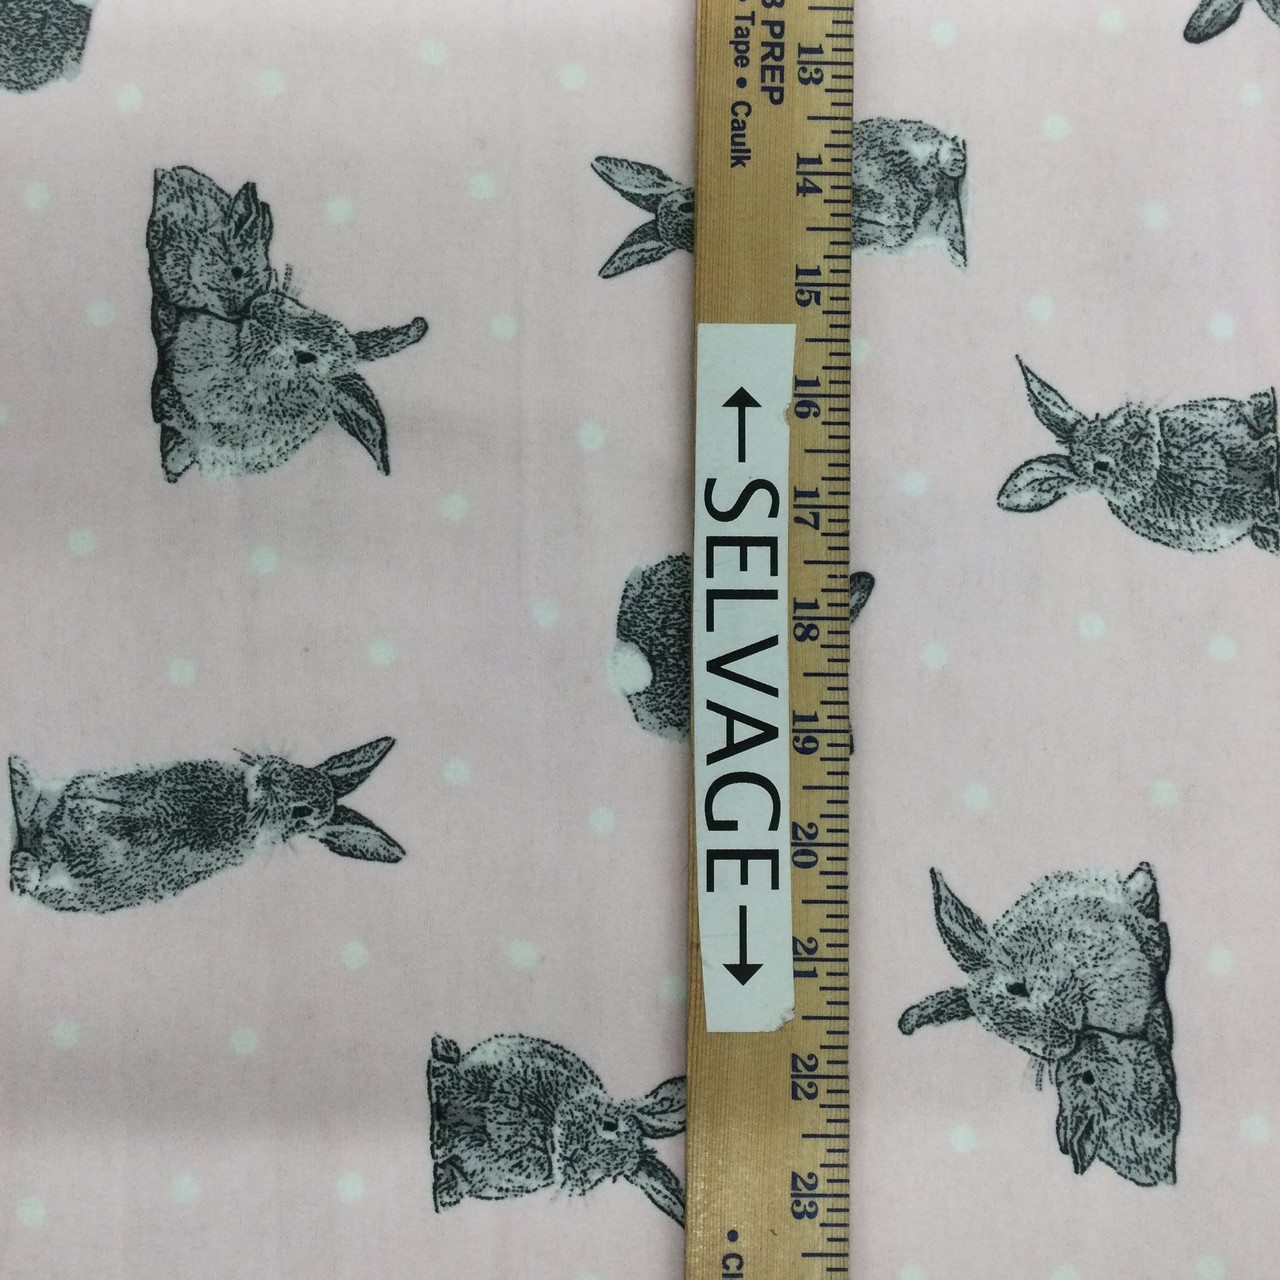 https://cdn11.bigcommerce.com/s-z9t2ne/images/stencil/1280x1280/products/41799/397754/juvenile-flannel-fabric__53022.1644362346.jpg?c=2?imbypass=on